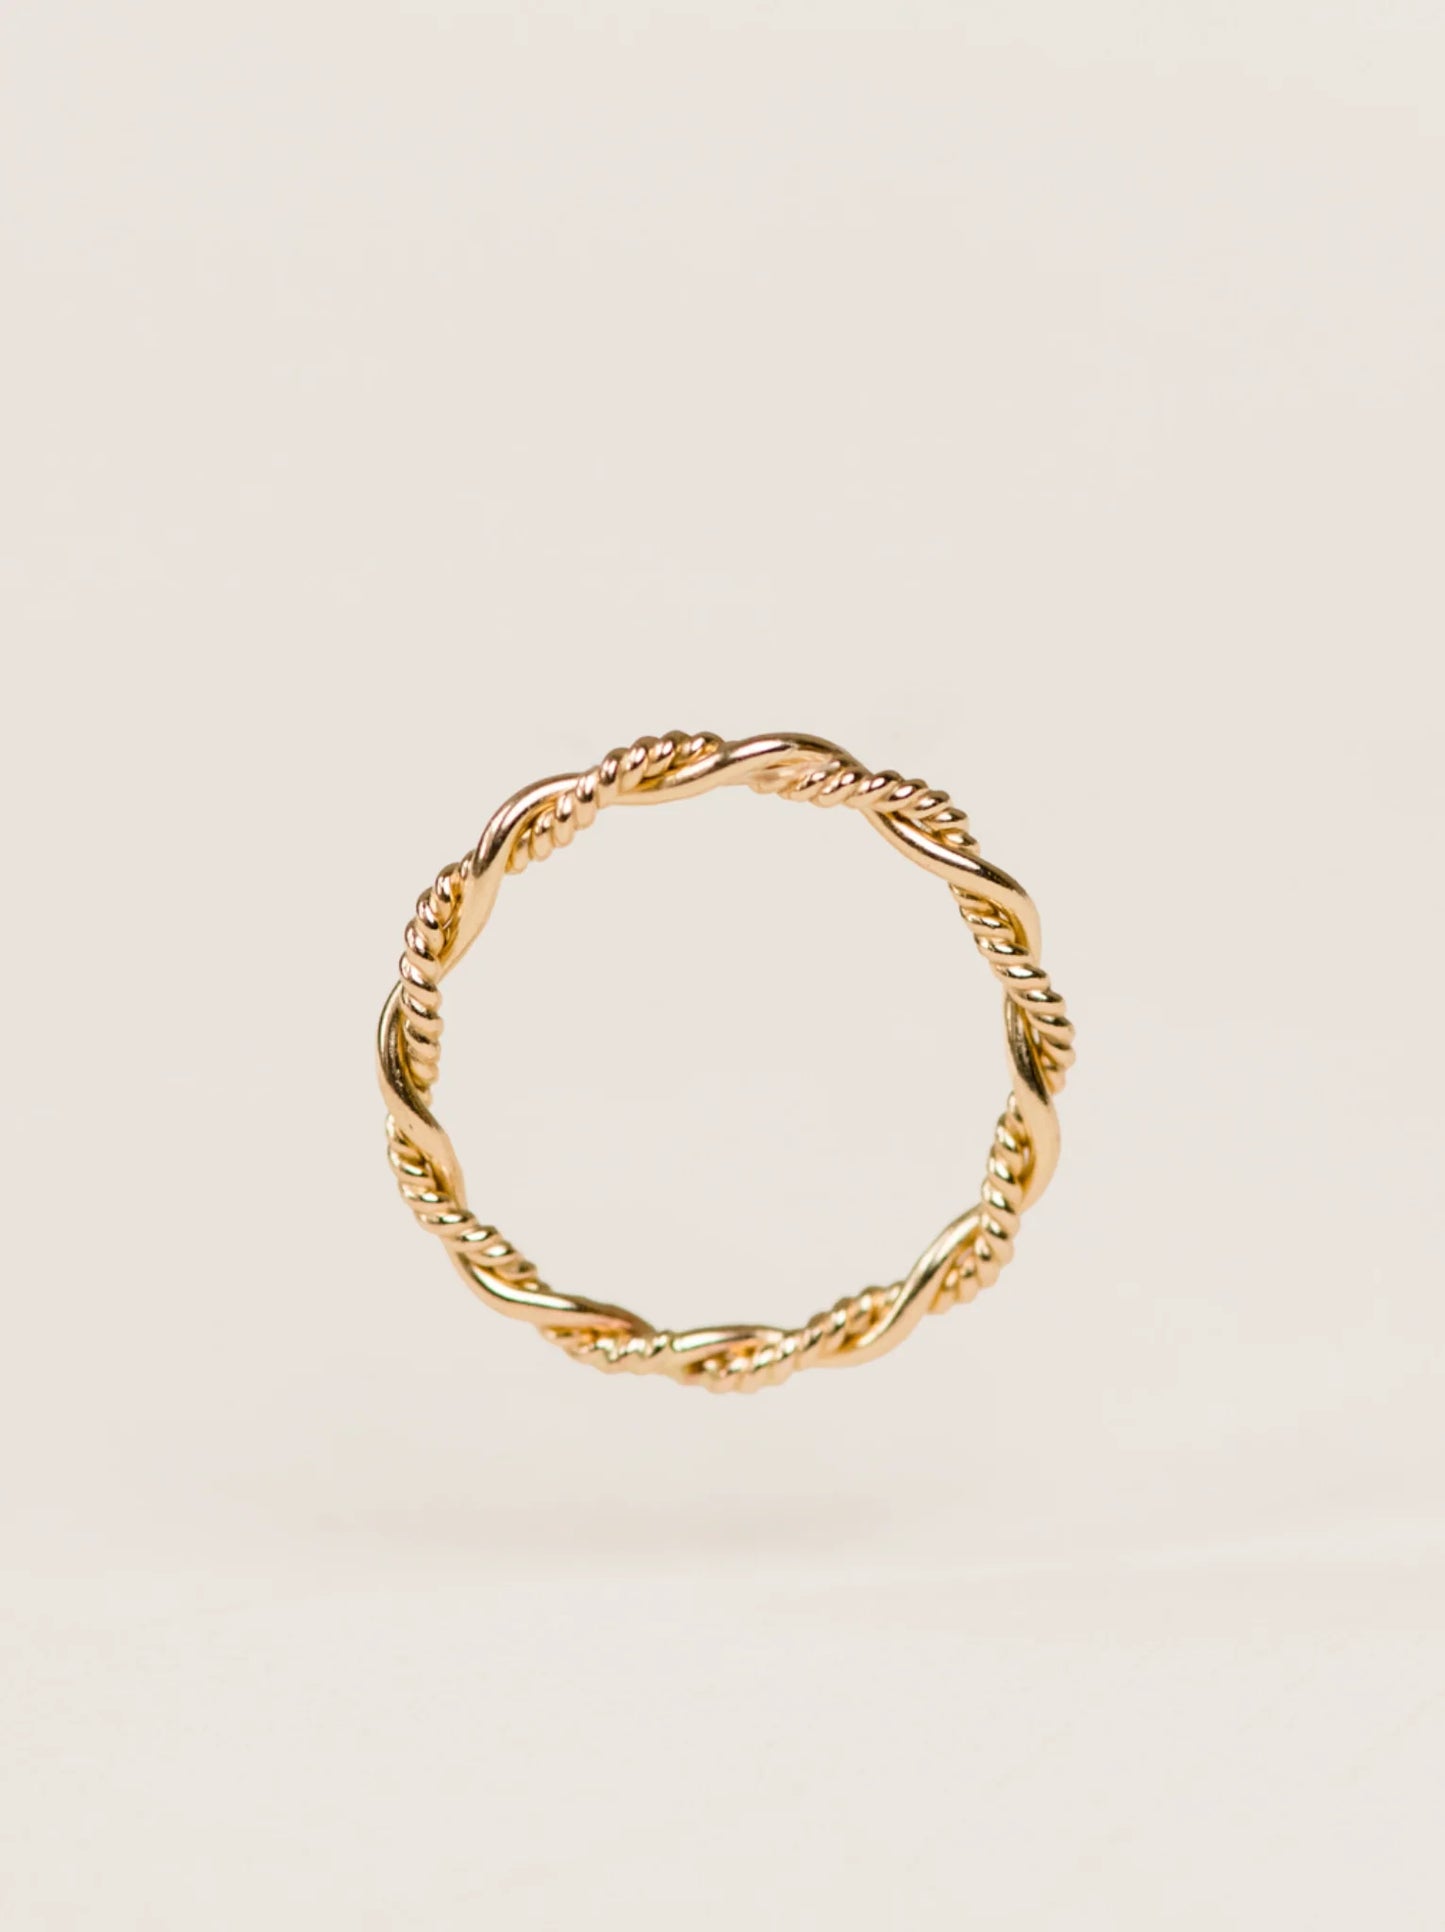 Braided Twist Ring by Able